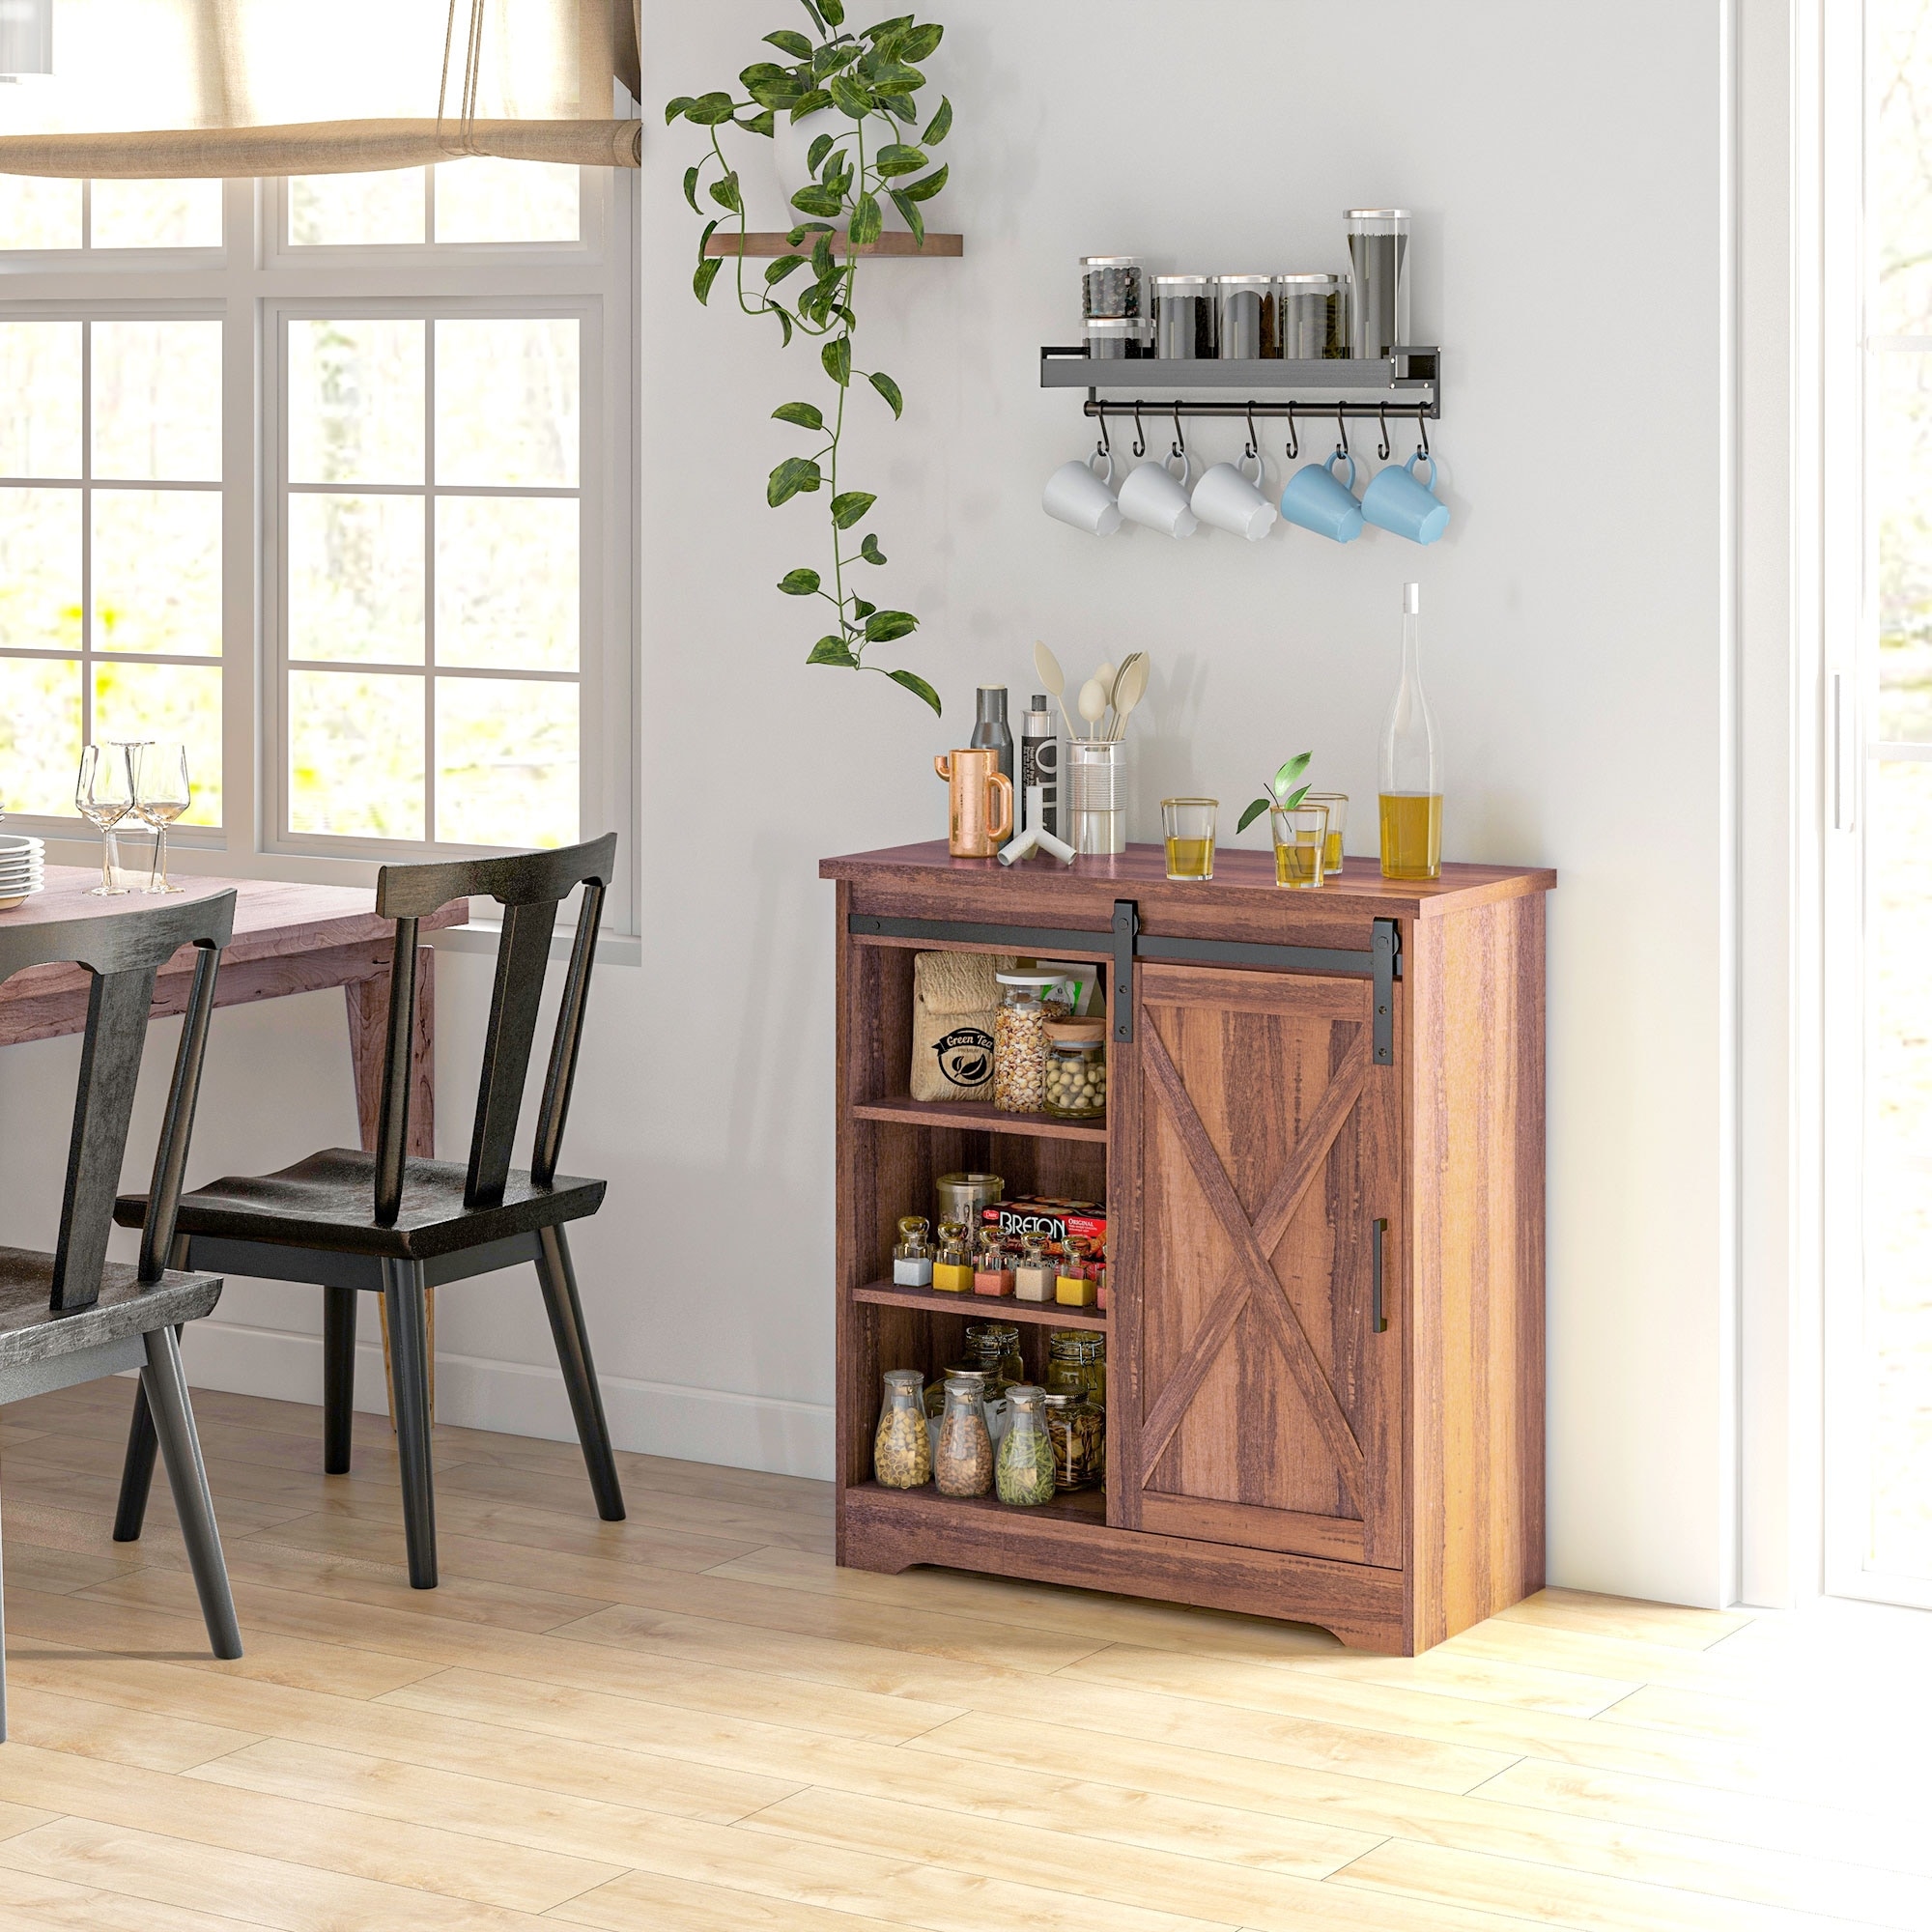 https://ak1.ostkcdn.com/images/products/is/images/direct/1b7b6f4a37d9d6a822ac413688cd36230ae4441f/HOMCOM-Farmhouse-Coffee-Bar-Cabinet%2C-33%22-Buffet-Sideboard-with-Sliding-Barn-Door-and-Adjustable-Shelf%2C-Brown.jpg